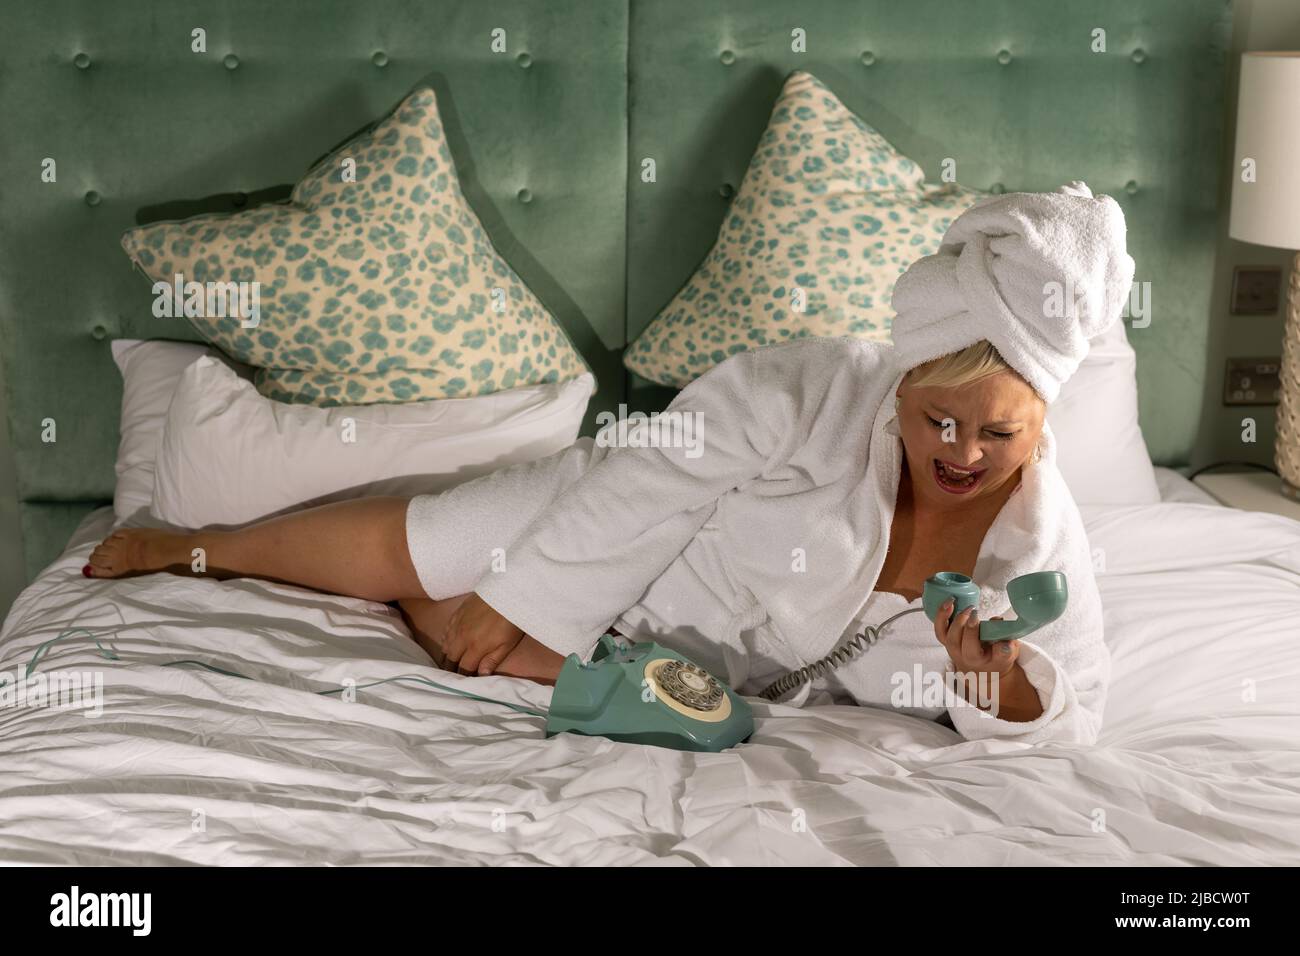 Luxury lifestyle shoot with female model, wearing white robe on king sized bed  with rotary phone, Stock Photo